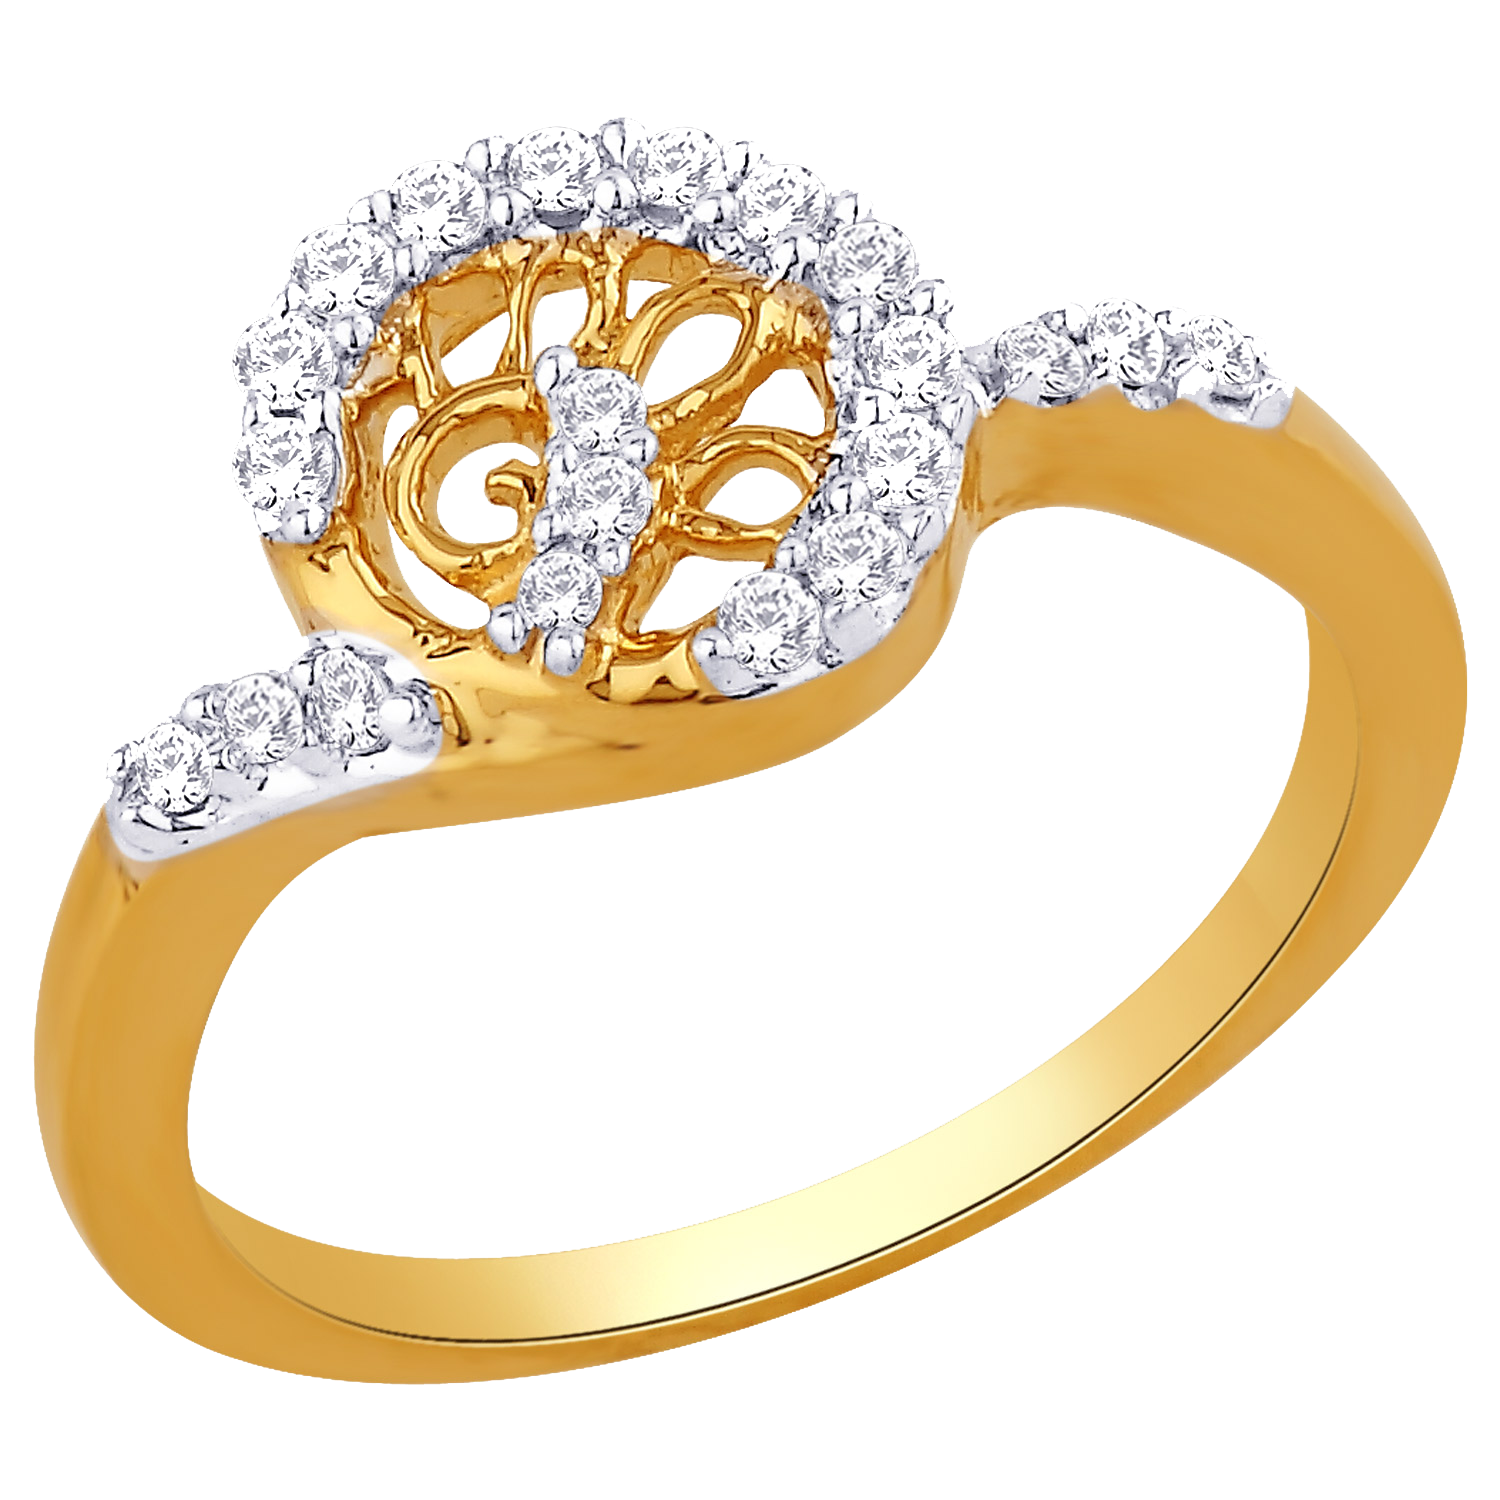 Jewellery Ring Hd PNG Image